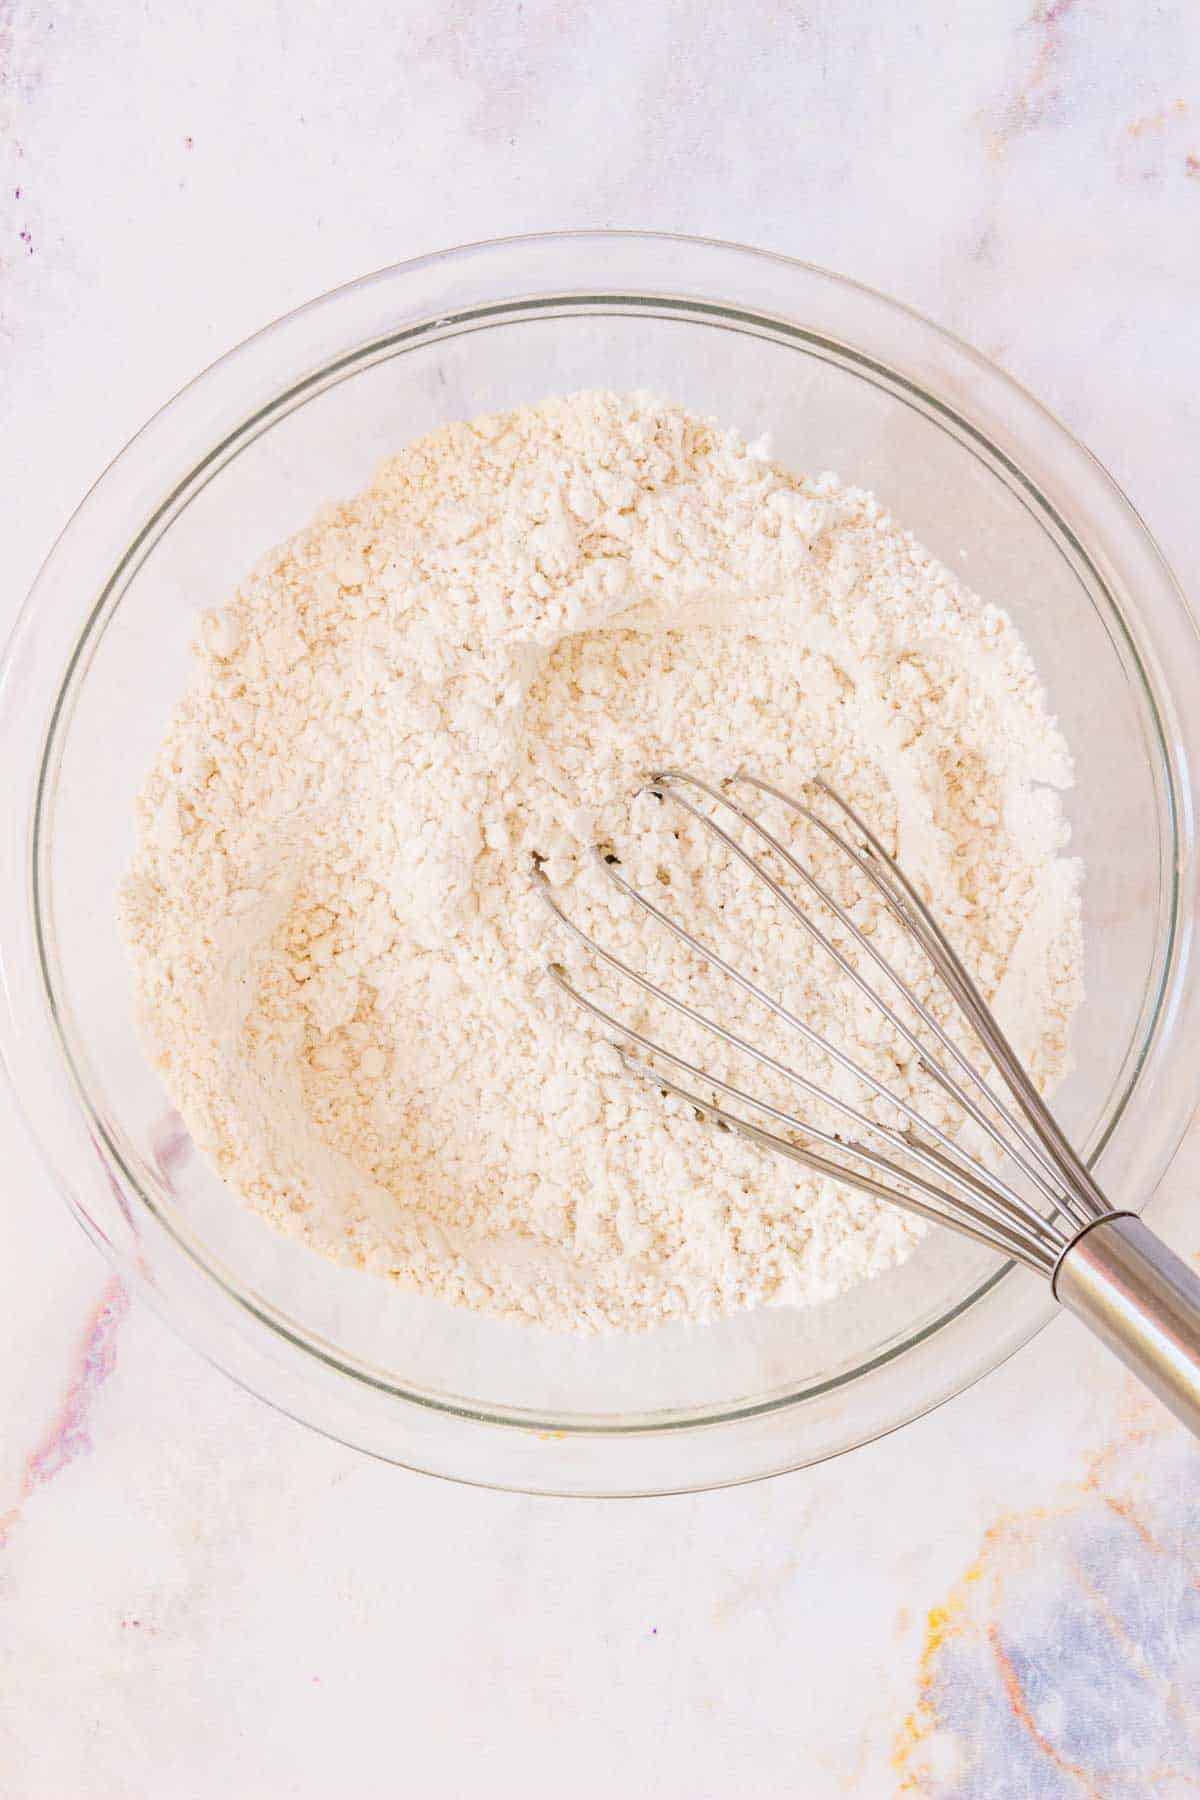 Gluten free flour and other dry ingredients are whisked together in a mixing bowl.